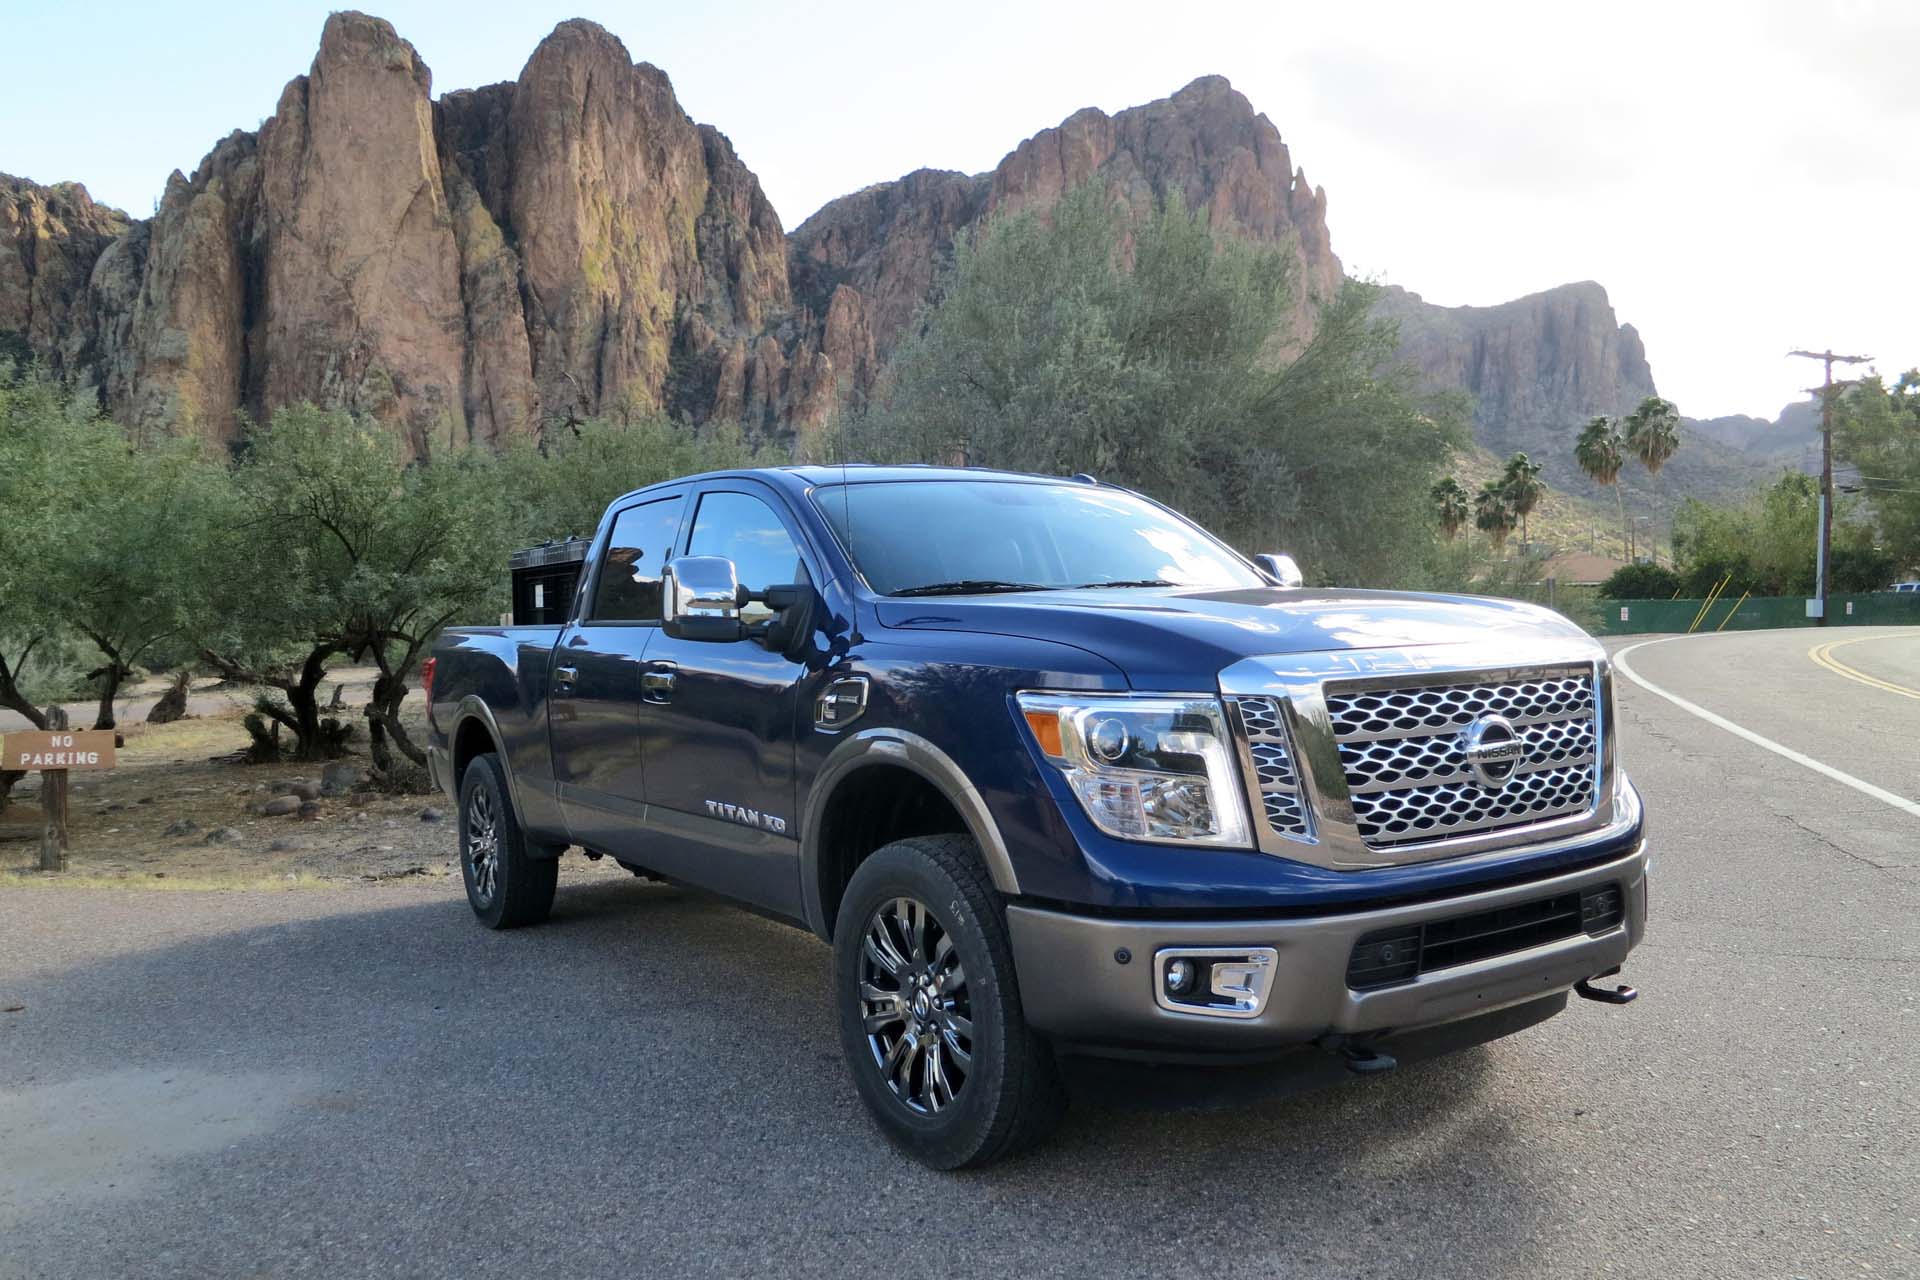 The new Nissan Titan XD is the first of its kind: a light duty, diesel-powered pickup built to handle heavy duty tasks. It's the perfect compromise for the buyer who wants the strength and durability of a serious hauler, but doesn't want to give up the comfortable ride and maneuverability of a regular size truck. </p>
<p>Here are ten things you need to know about the 2016 Nissan Titan XD: